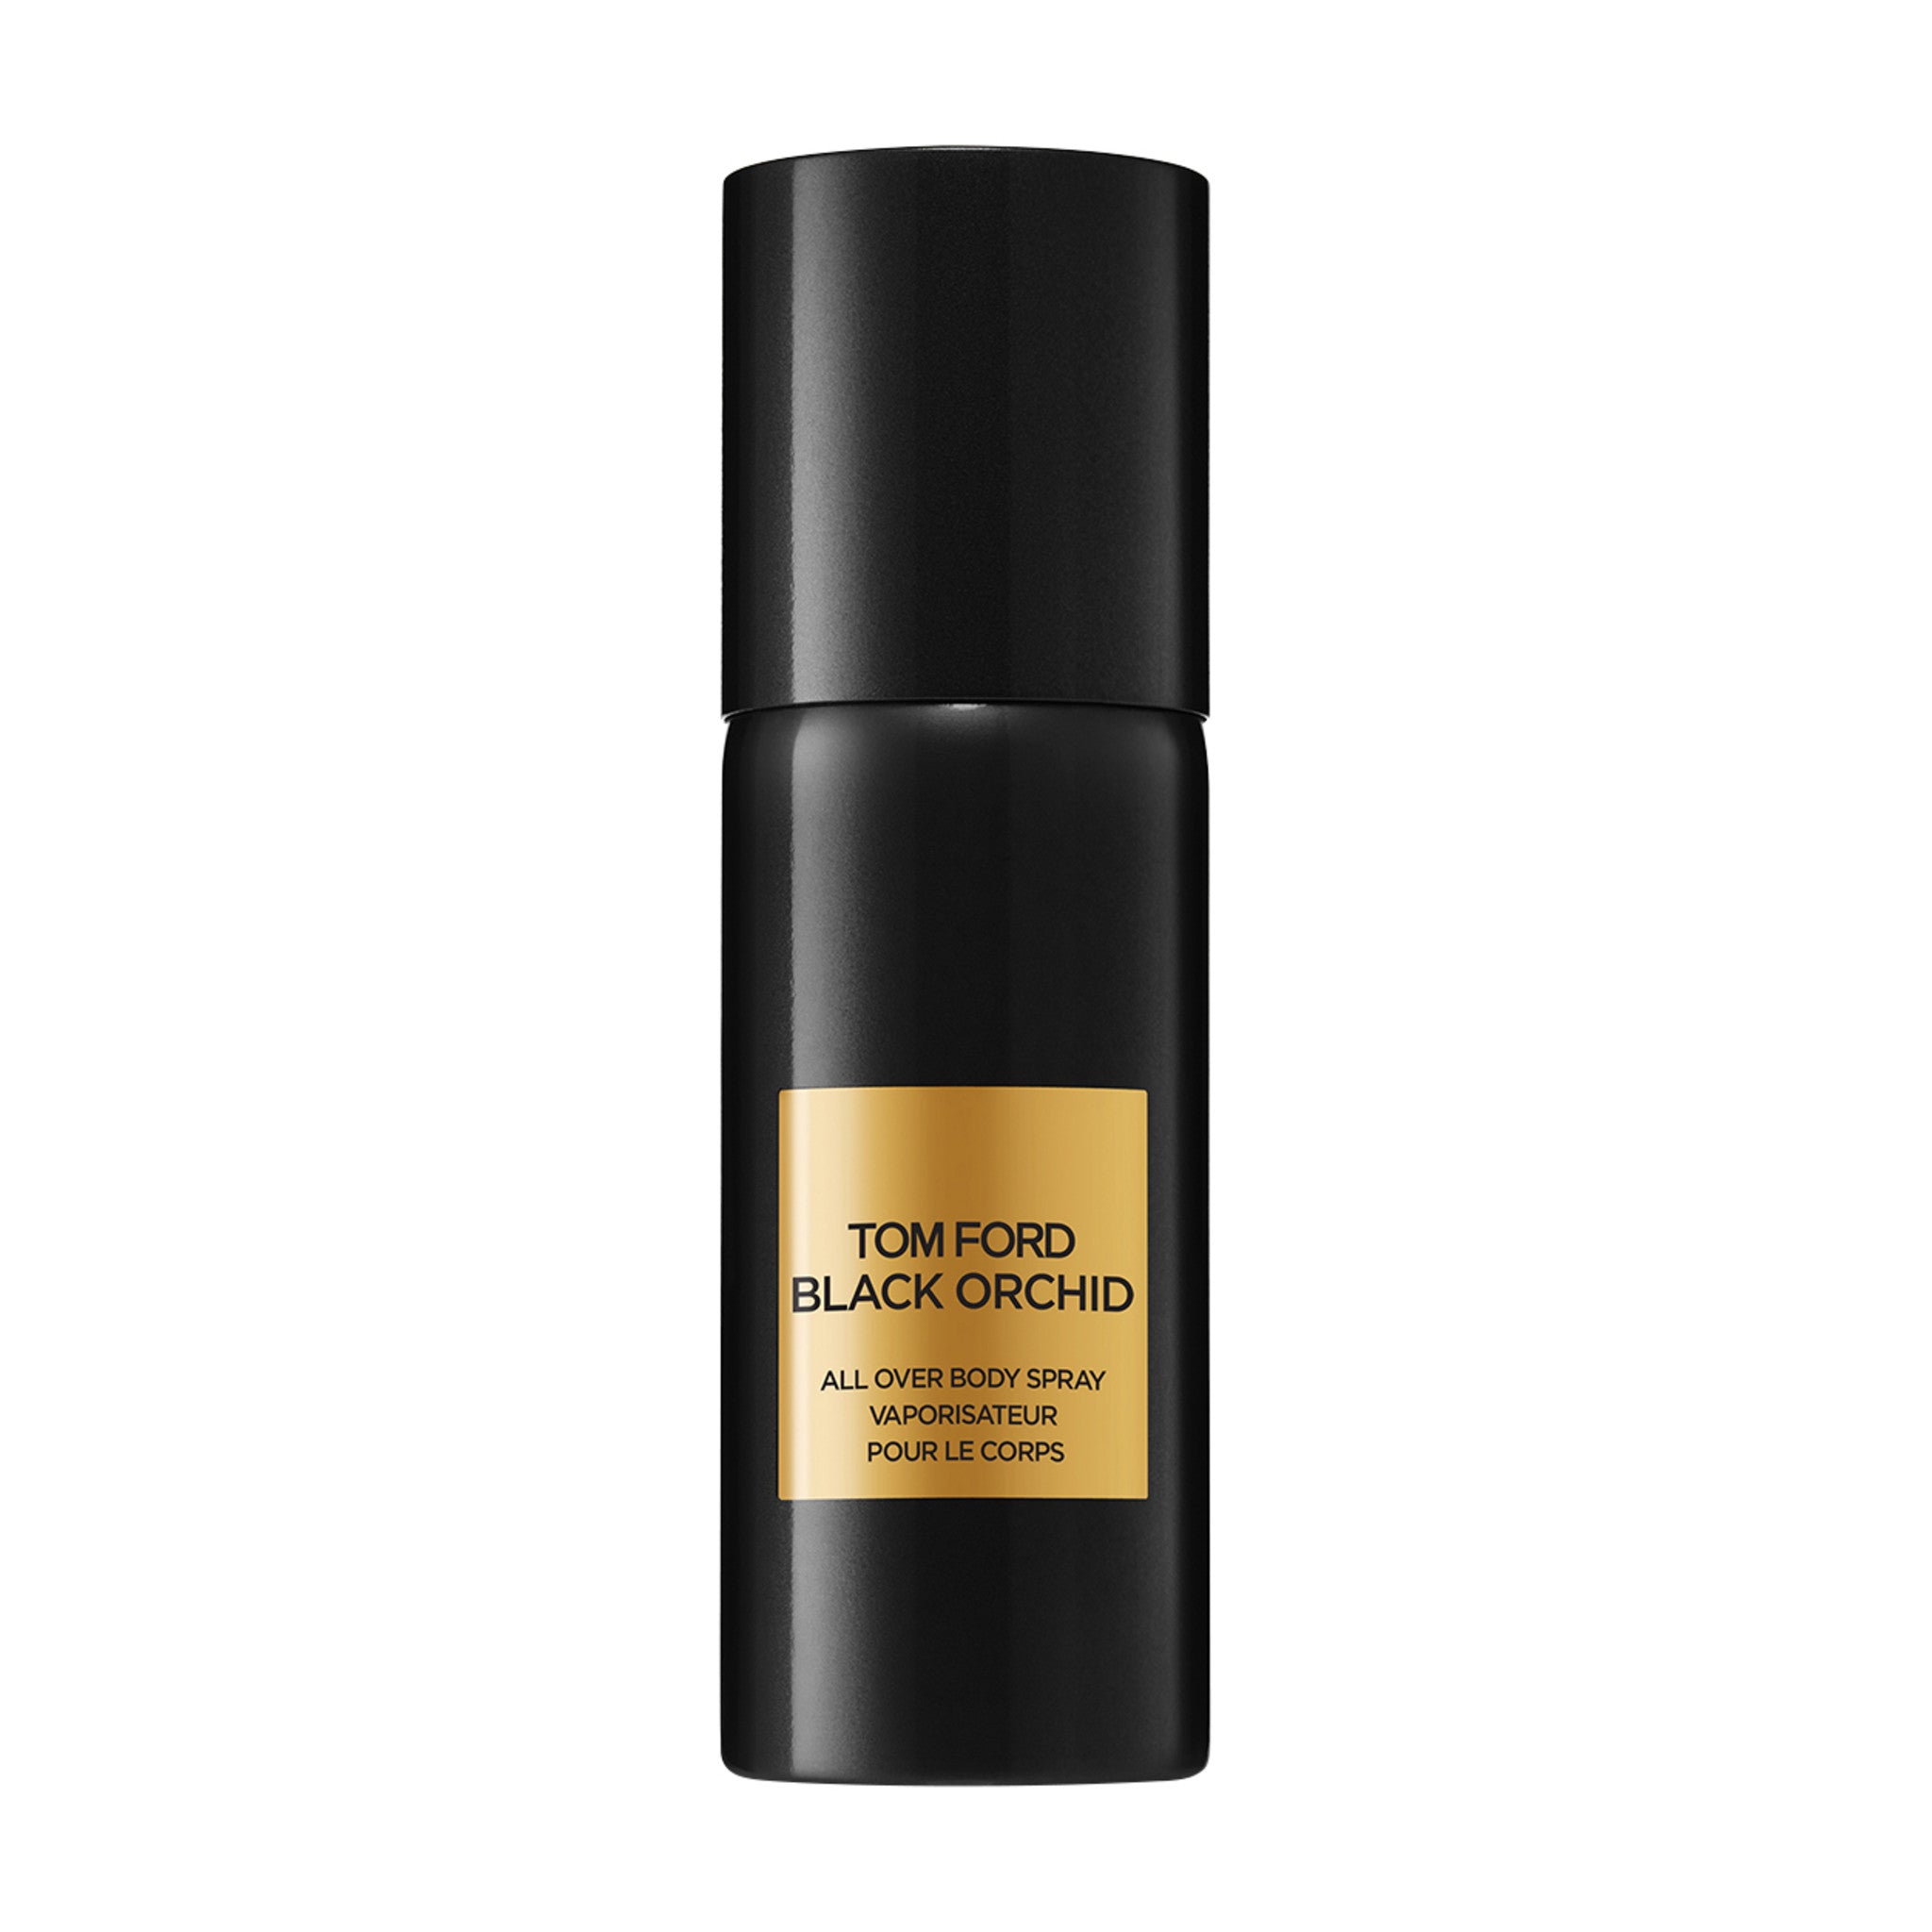 Tom Ford Black Orchid Body Spray main image.